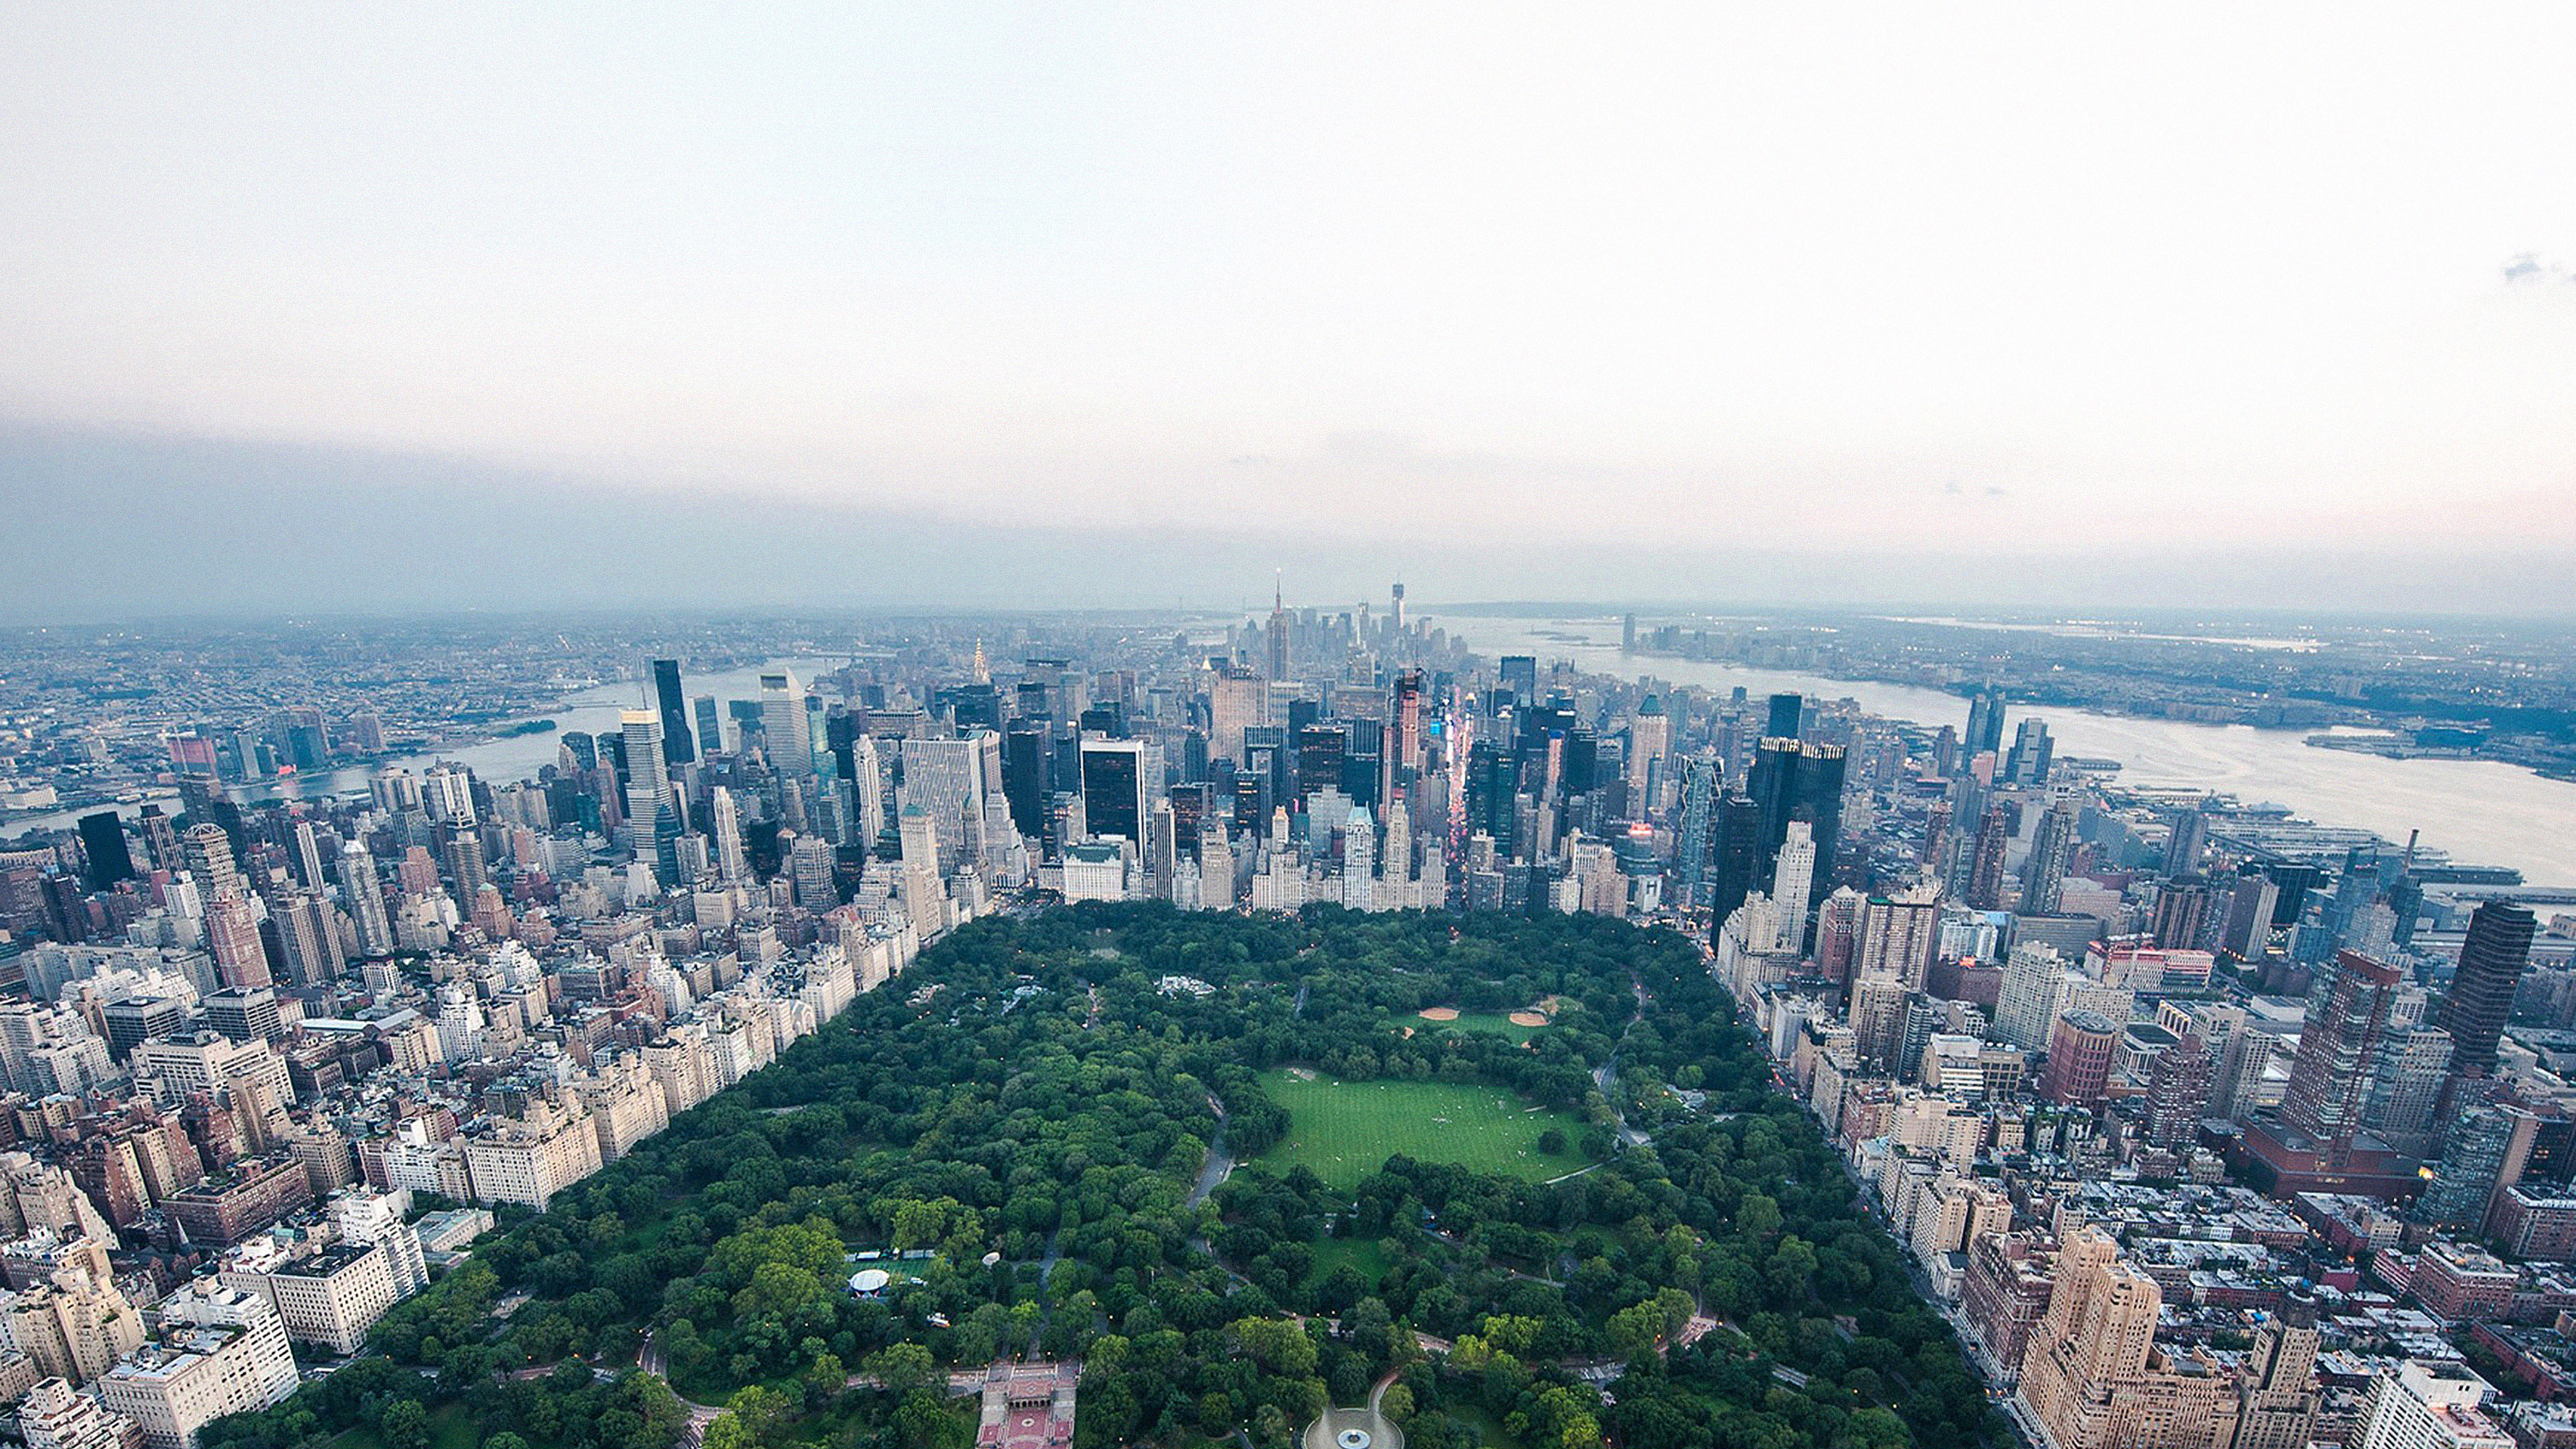 Central Park: One of the most famous parks in the world, Aerial view. 3840x2160 4K Wallpaper.